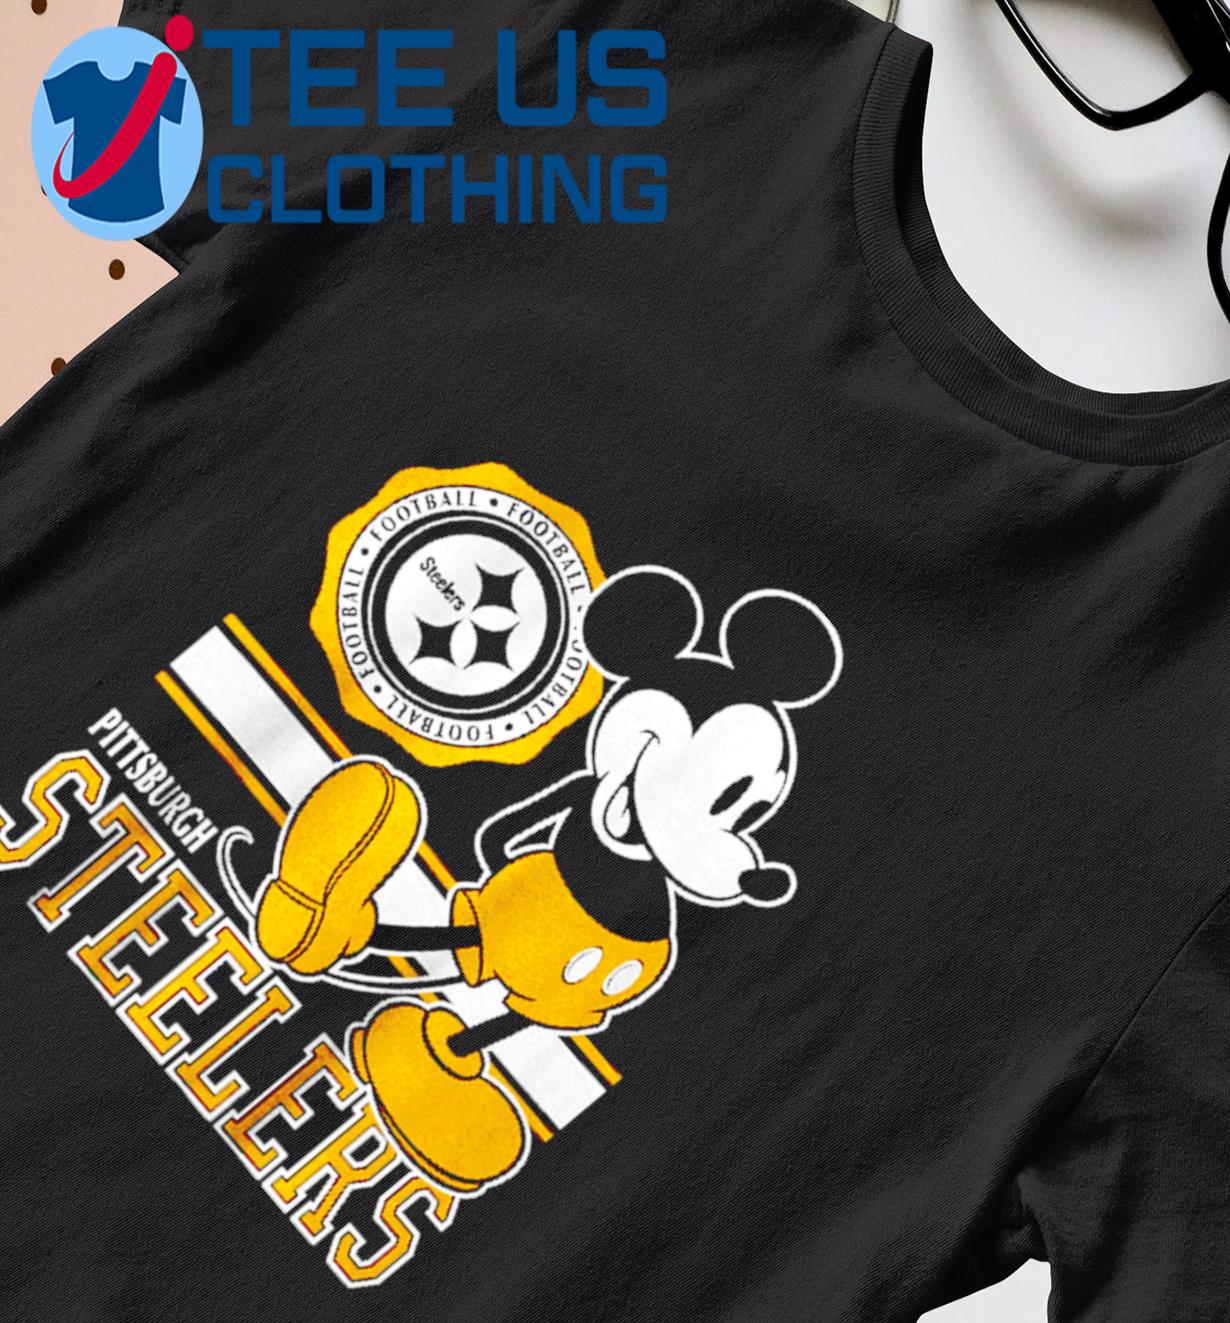 steelers mickey mouse shirt